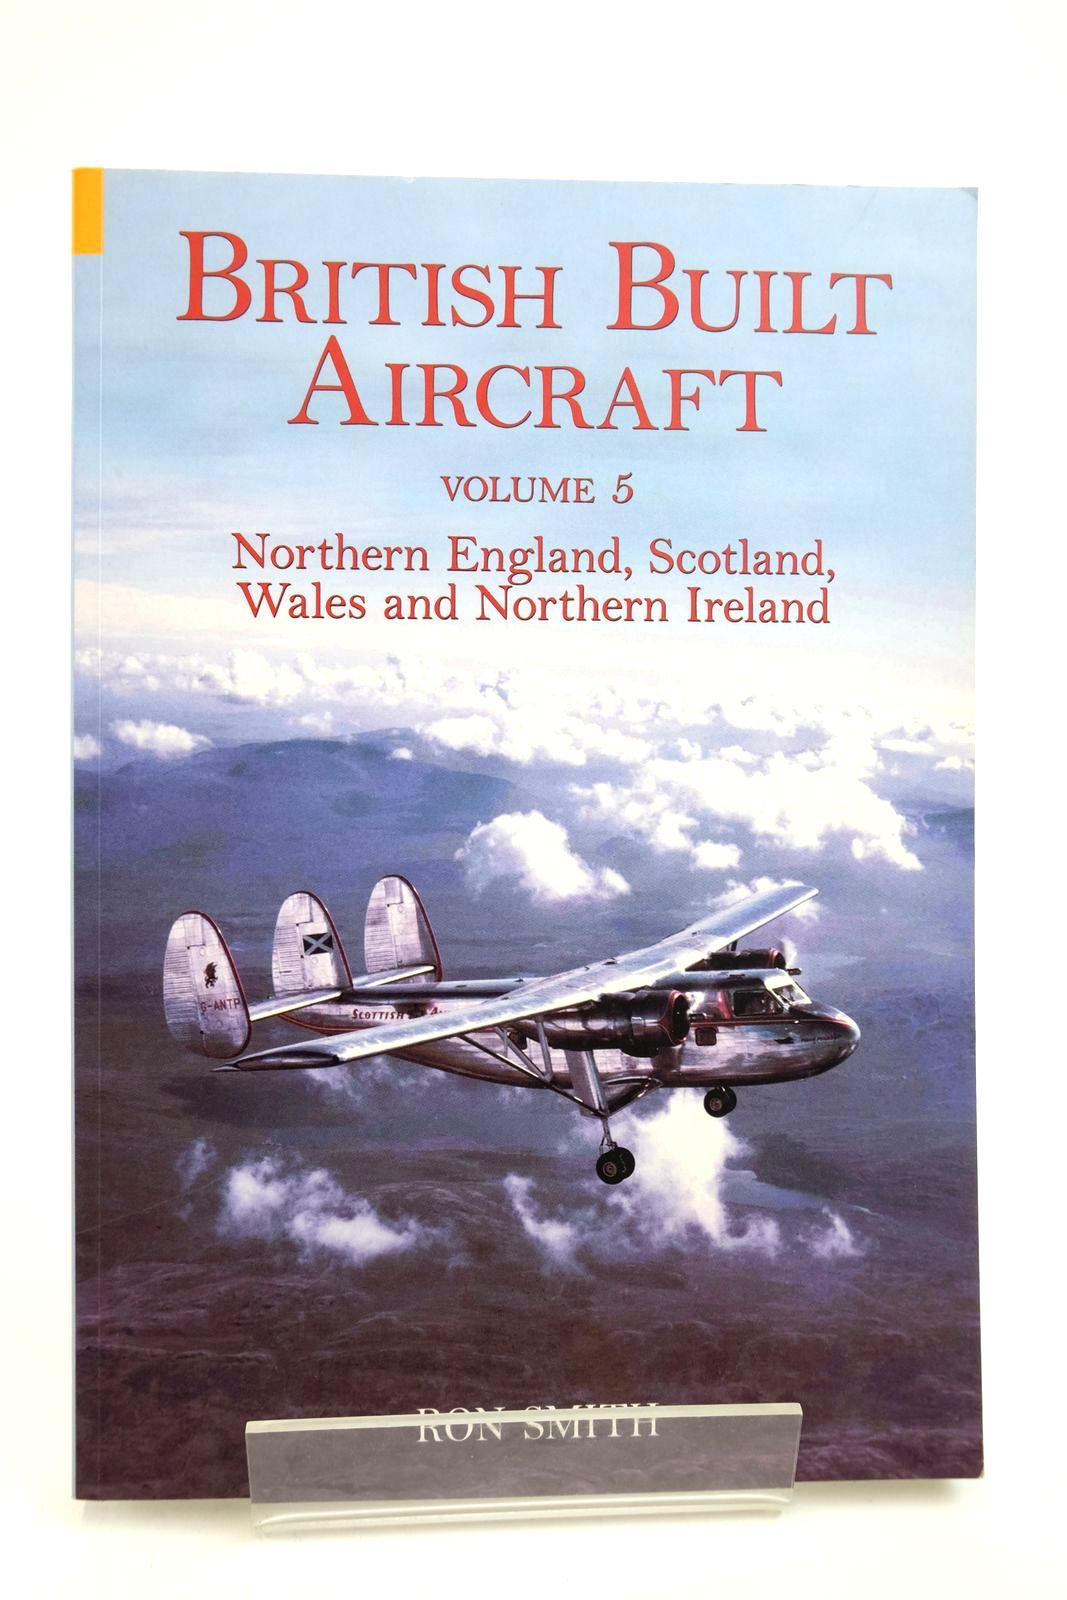 Photo of BRITISH BUILT AIRCRAFT VOLUME 5 NORTHEN ENGLAND, SCOTLAND, WALES AND NORTHERN IRELAND written by Smith, Ron published by Tempus (STOCK CODE: 2139193)  for sale by Stella & Rose's Books